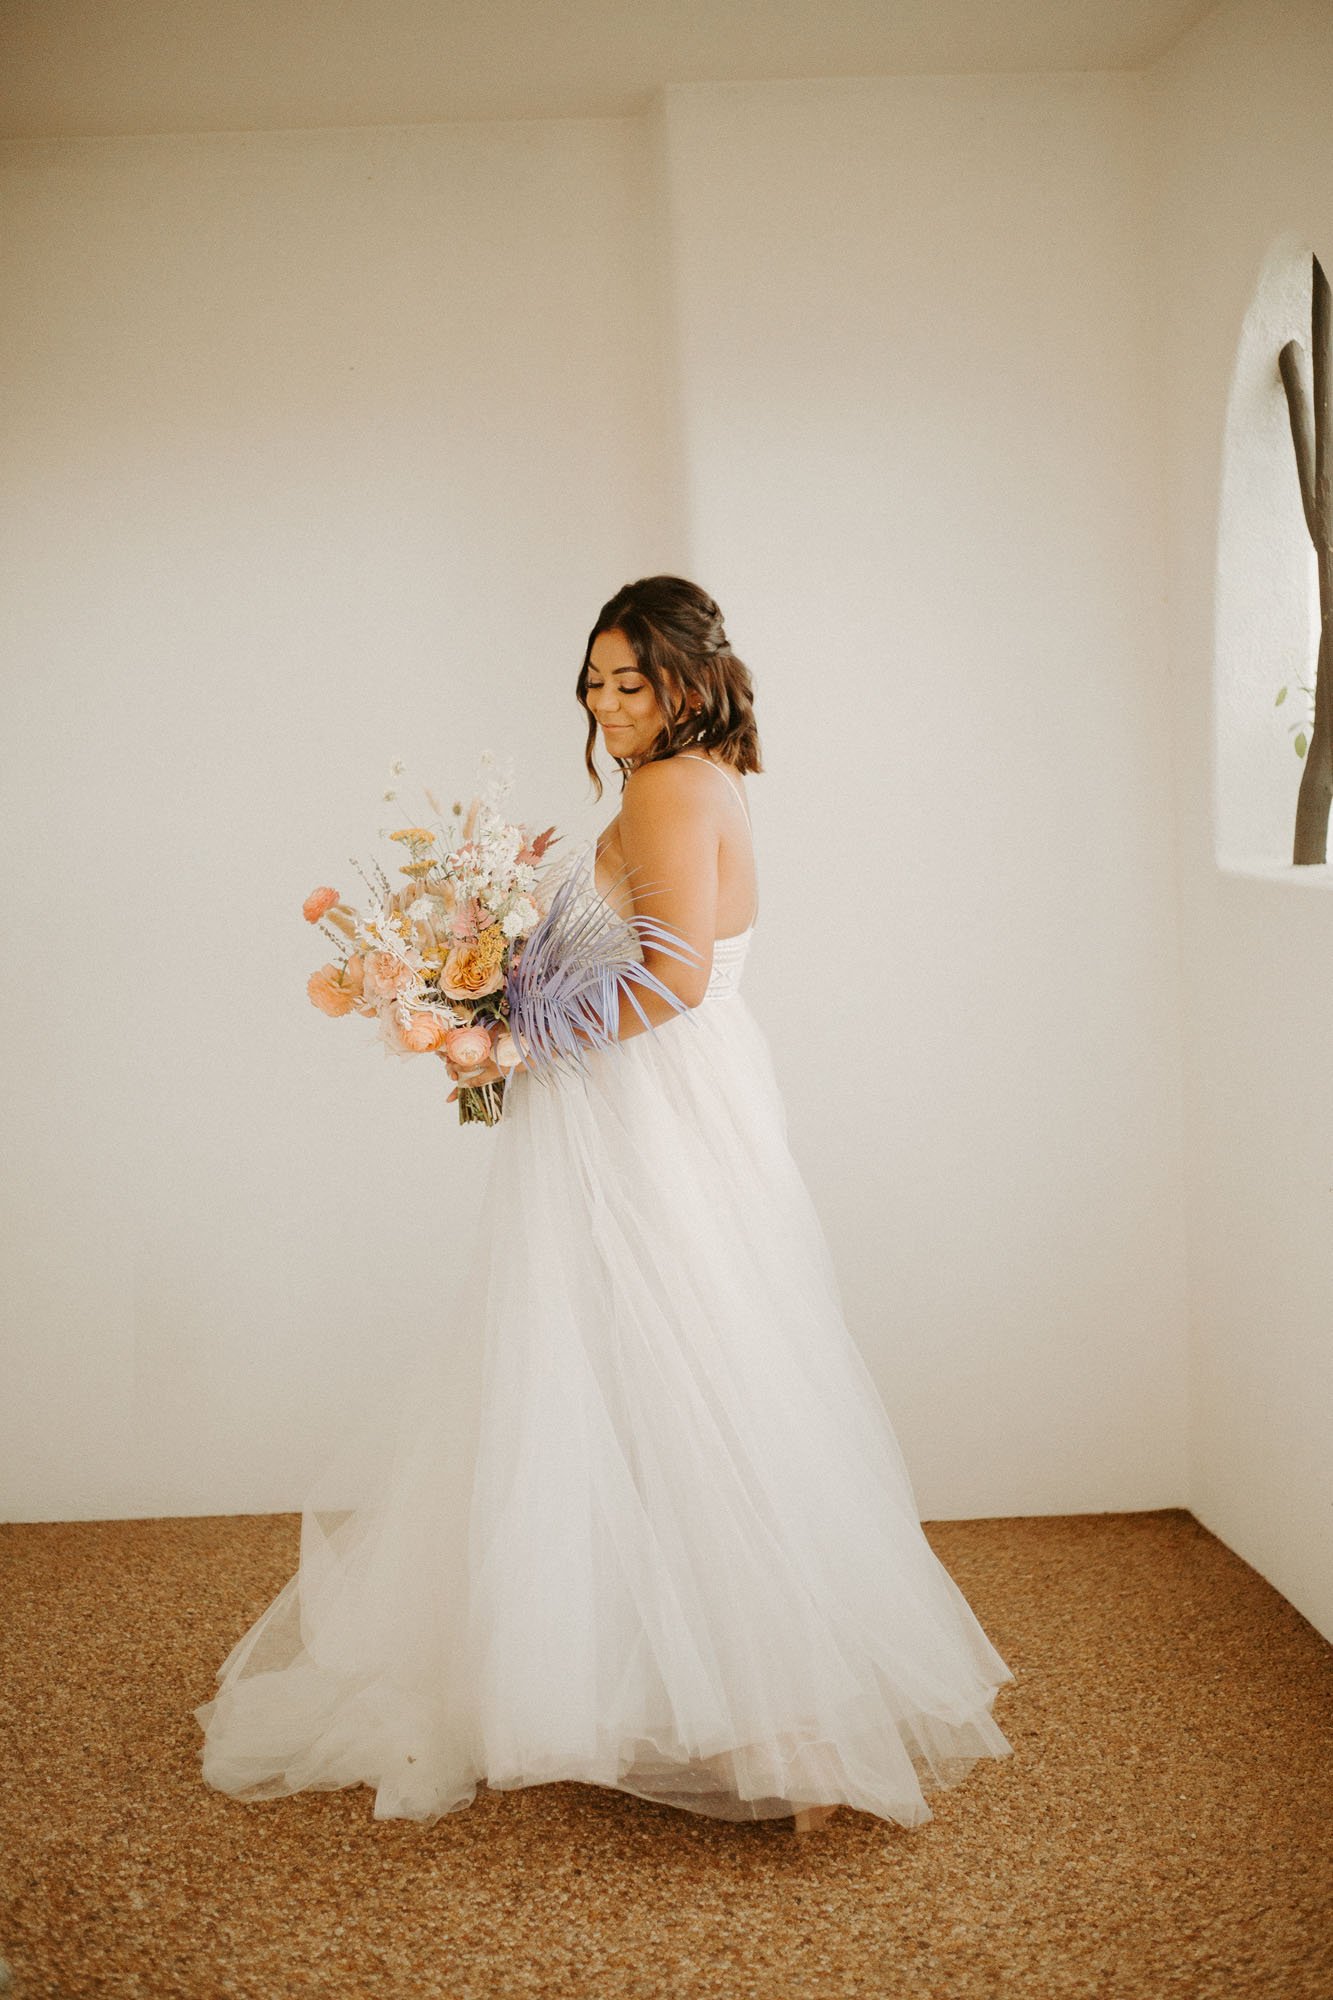  a fun modern bride wearing the thistle wedding dress by willowby by watters bridal and holding a colorful and boho bridal bouquet with purple, peach, and blush flowers 